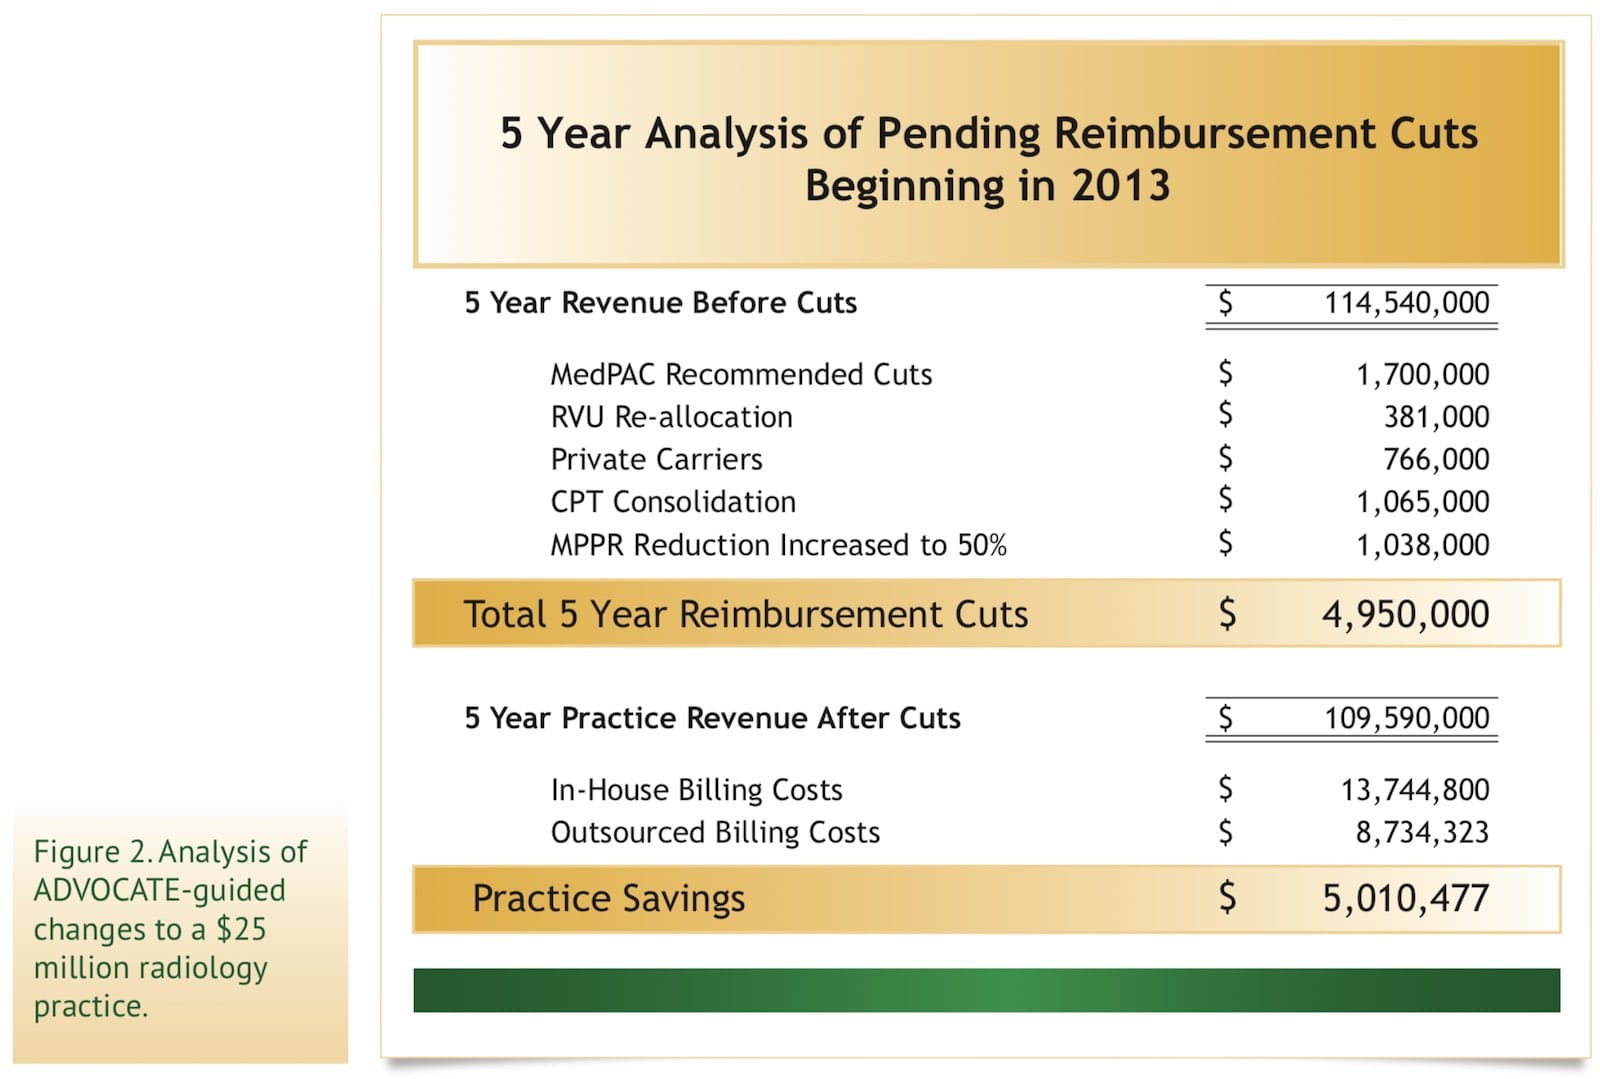 Analysis of ADVOCATE-guided changes to a $25 million radiology practice.